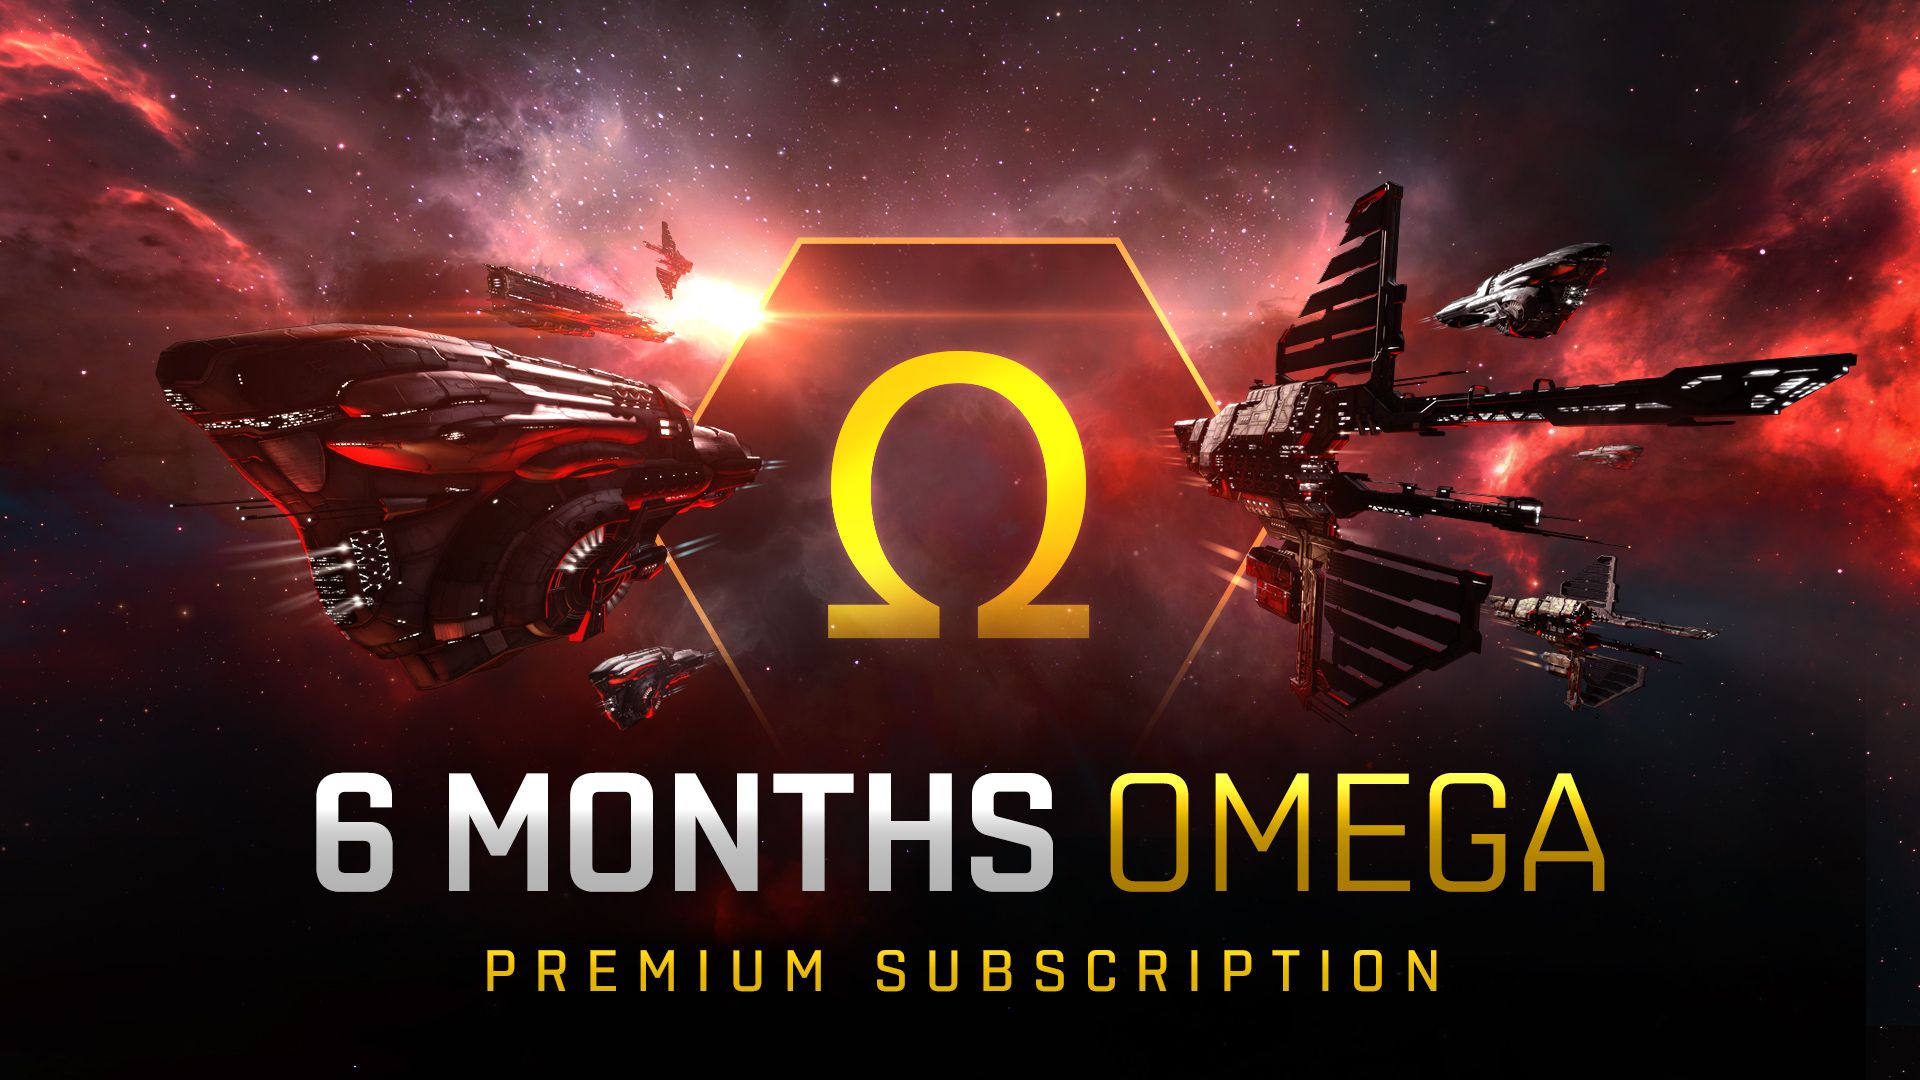 Eve Online Fanfest Special  6 Month Omega Time  Lachesis, Proteus, Falcon SKINs 